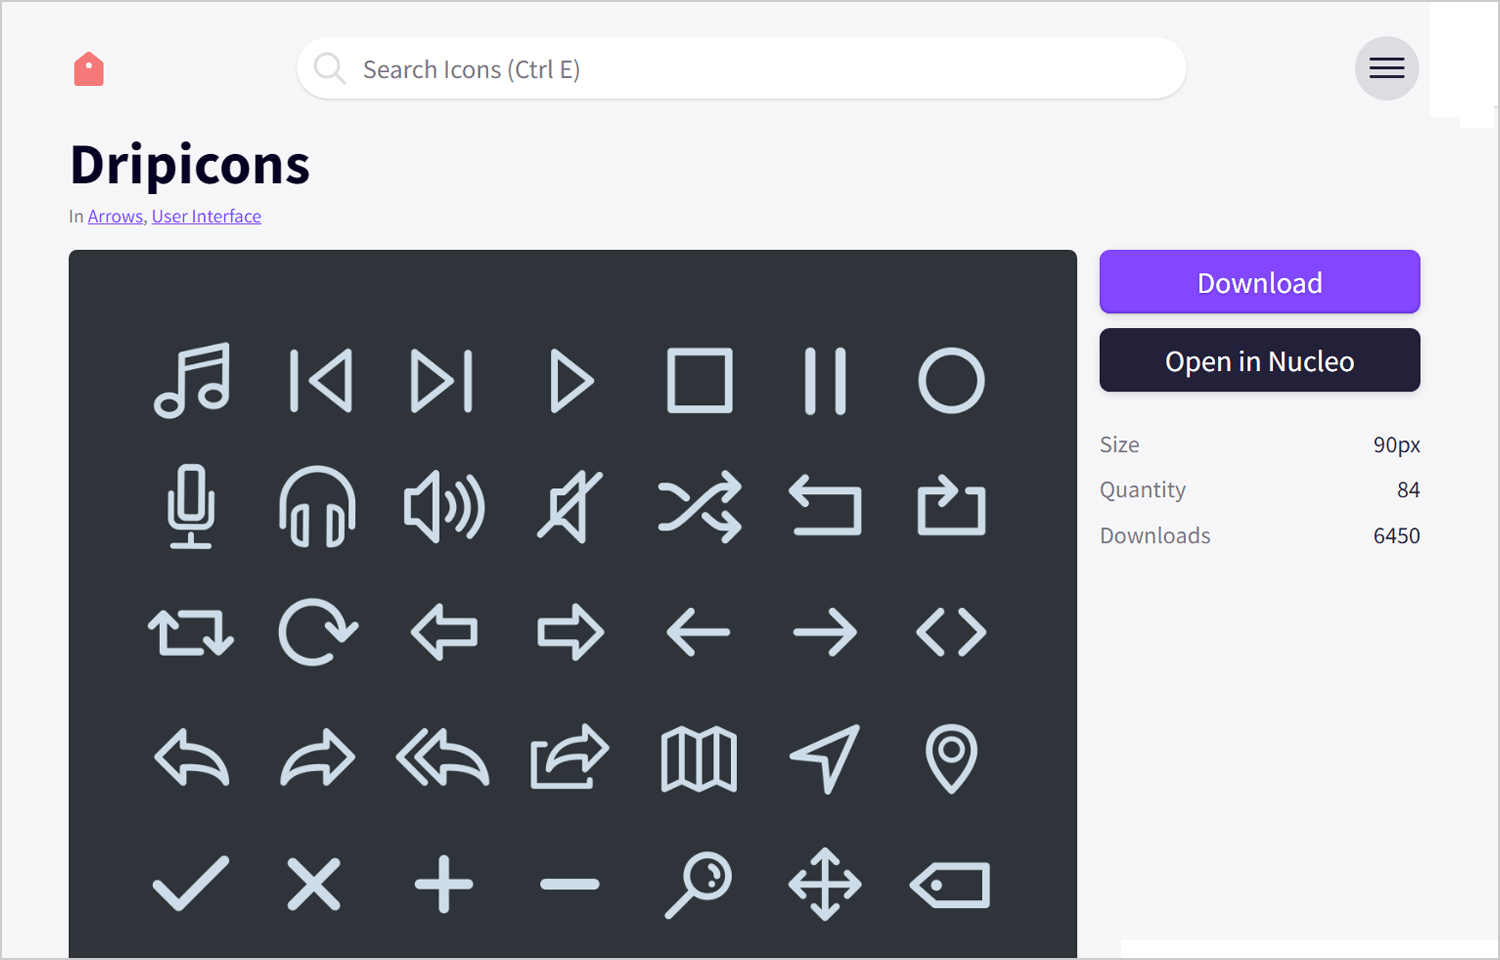 Dripicons page showing a set of 84 icons related to media and navigation